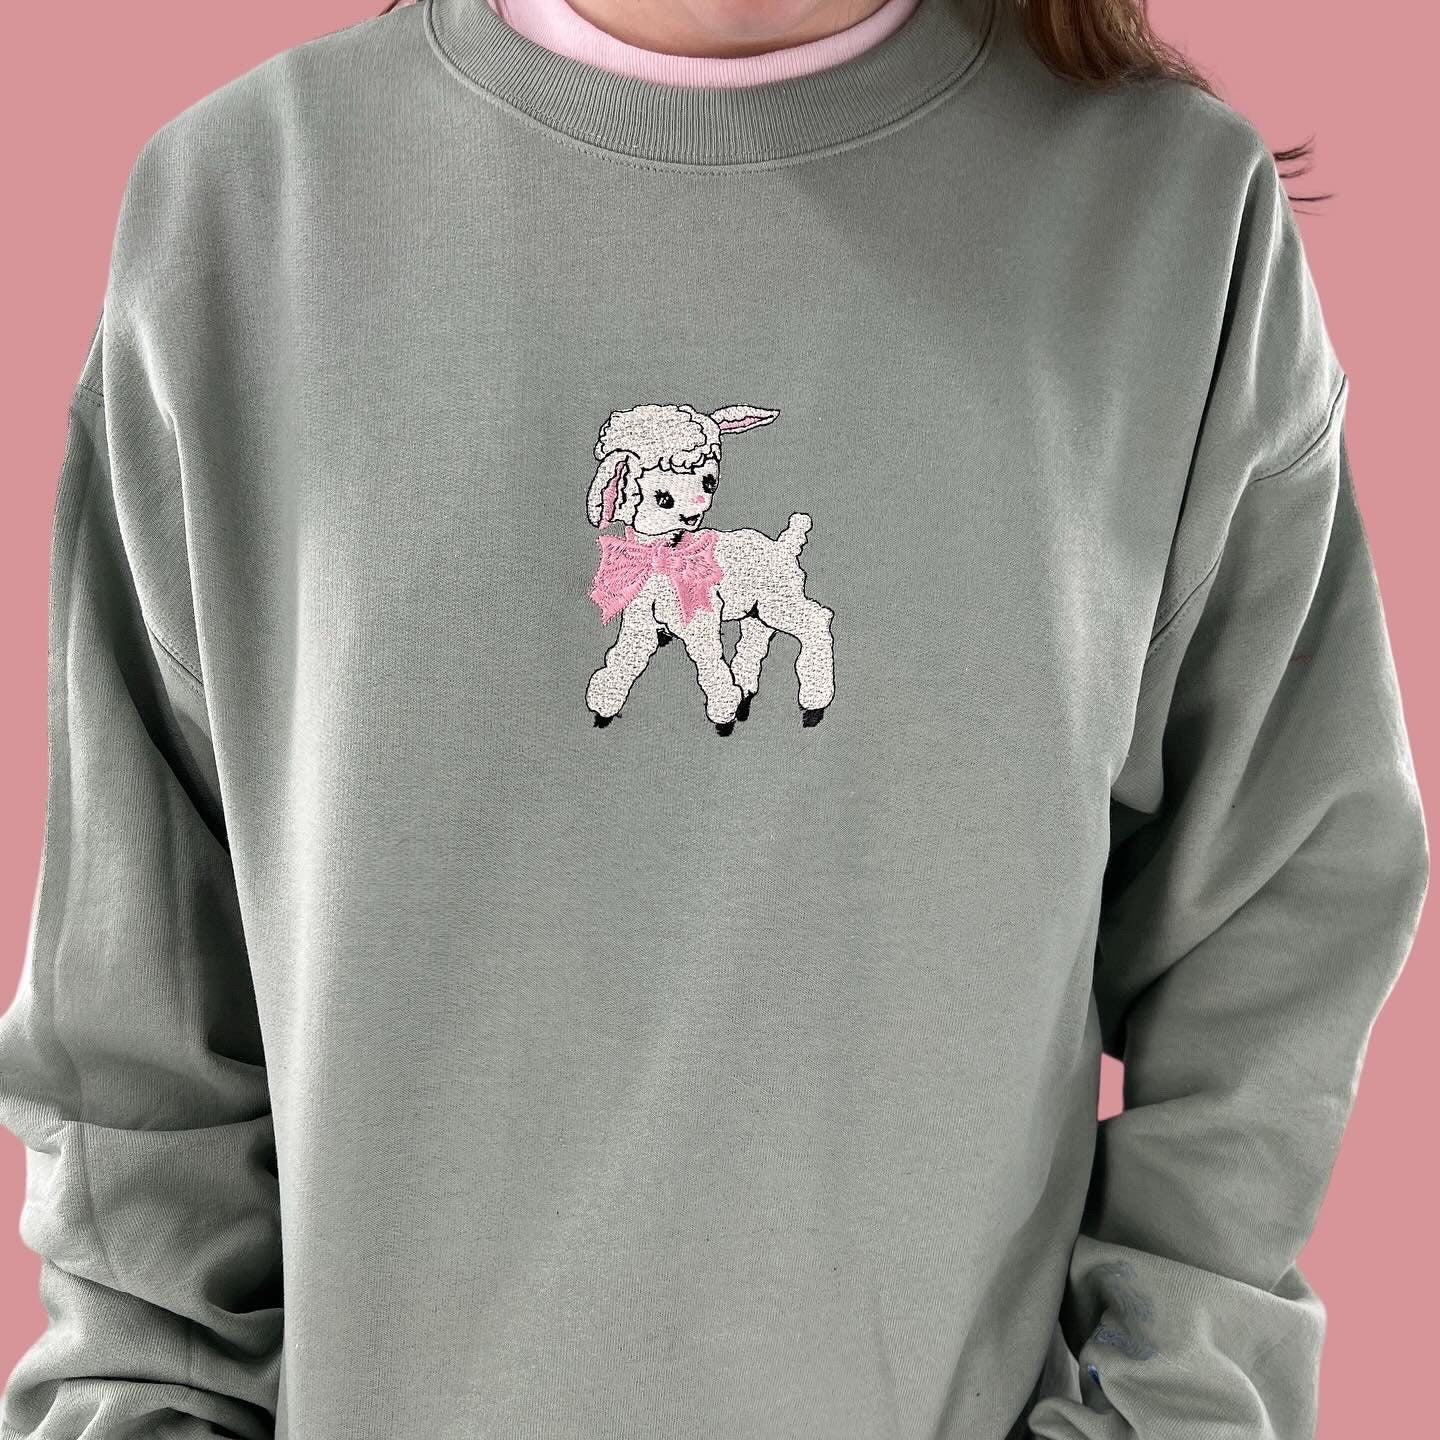 a woman wearing a gray sweatshirt with a pink poodle on it